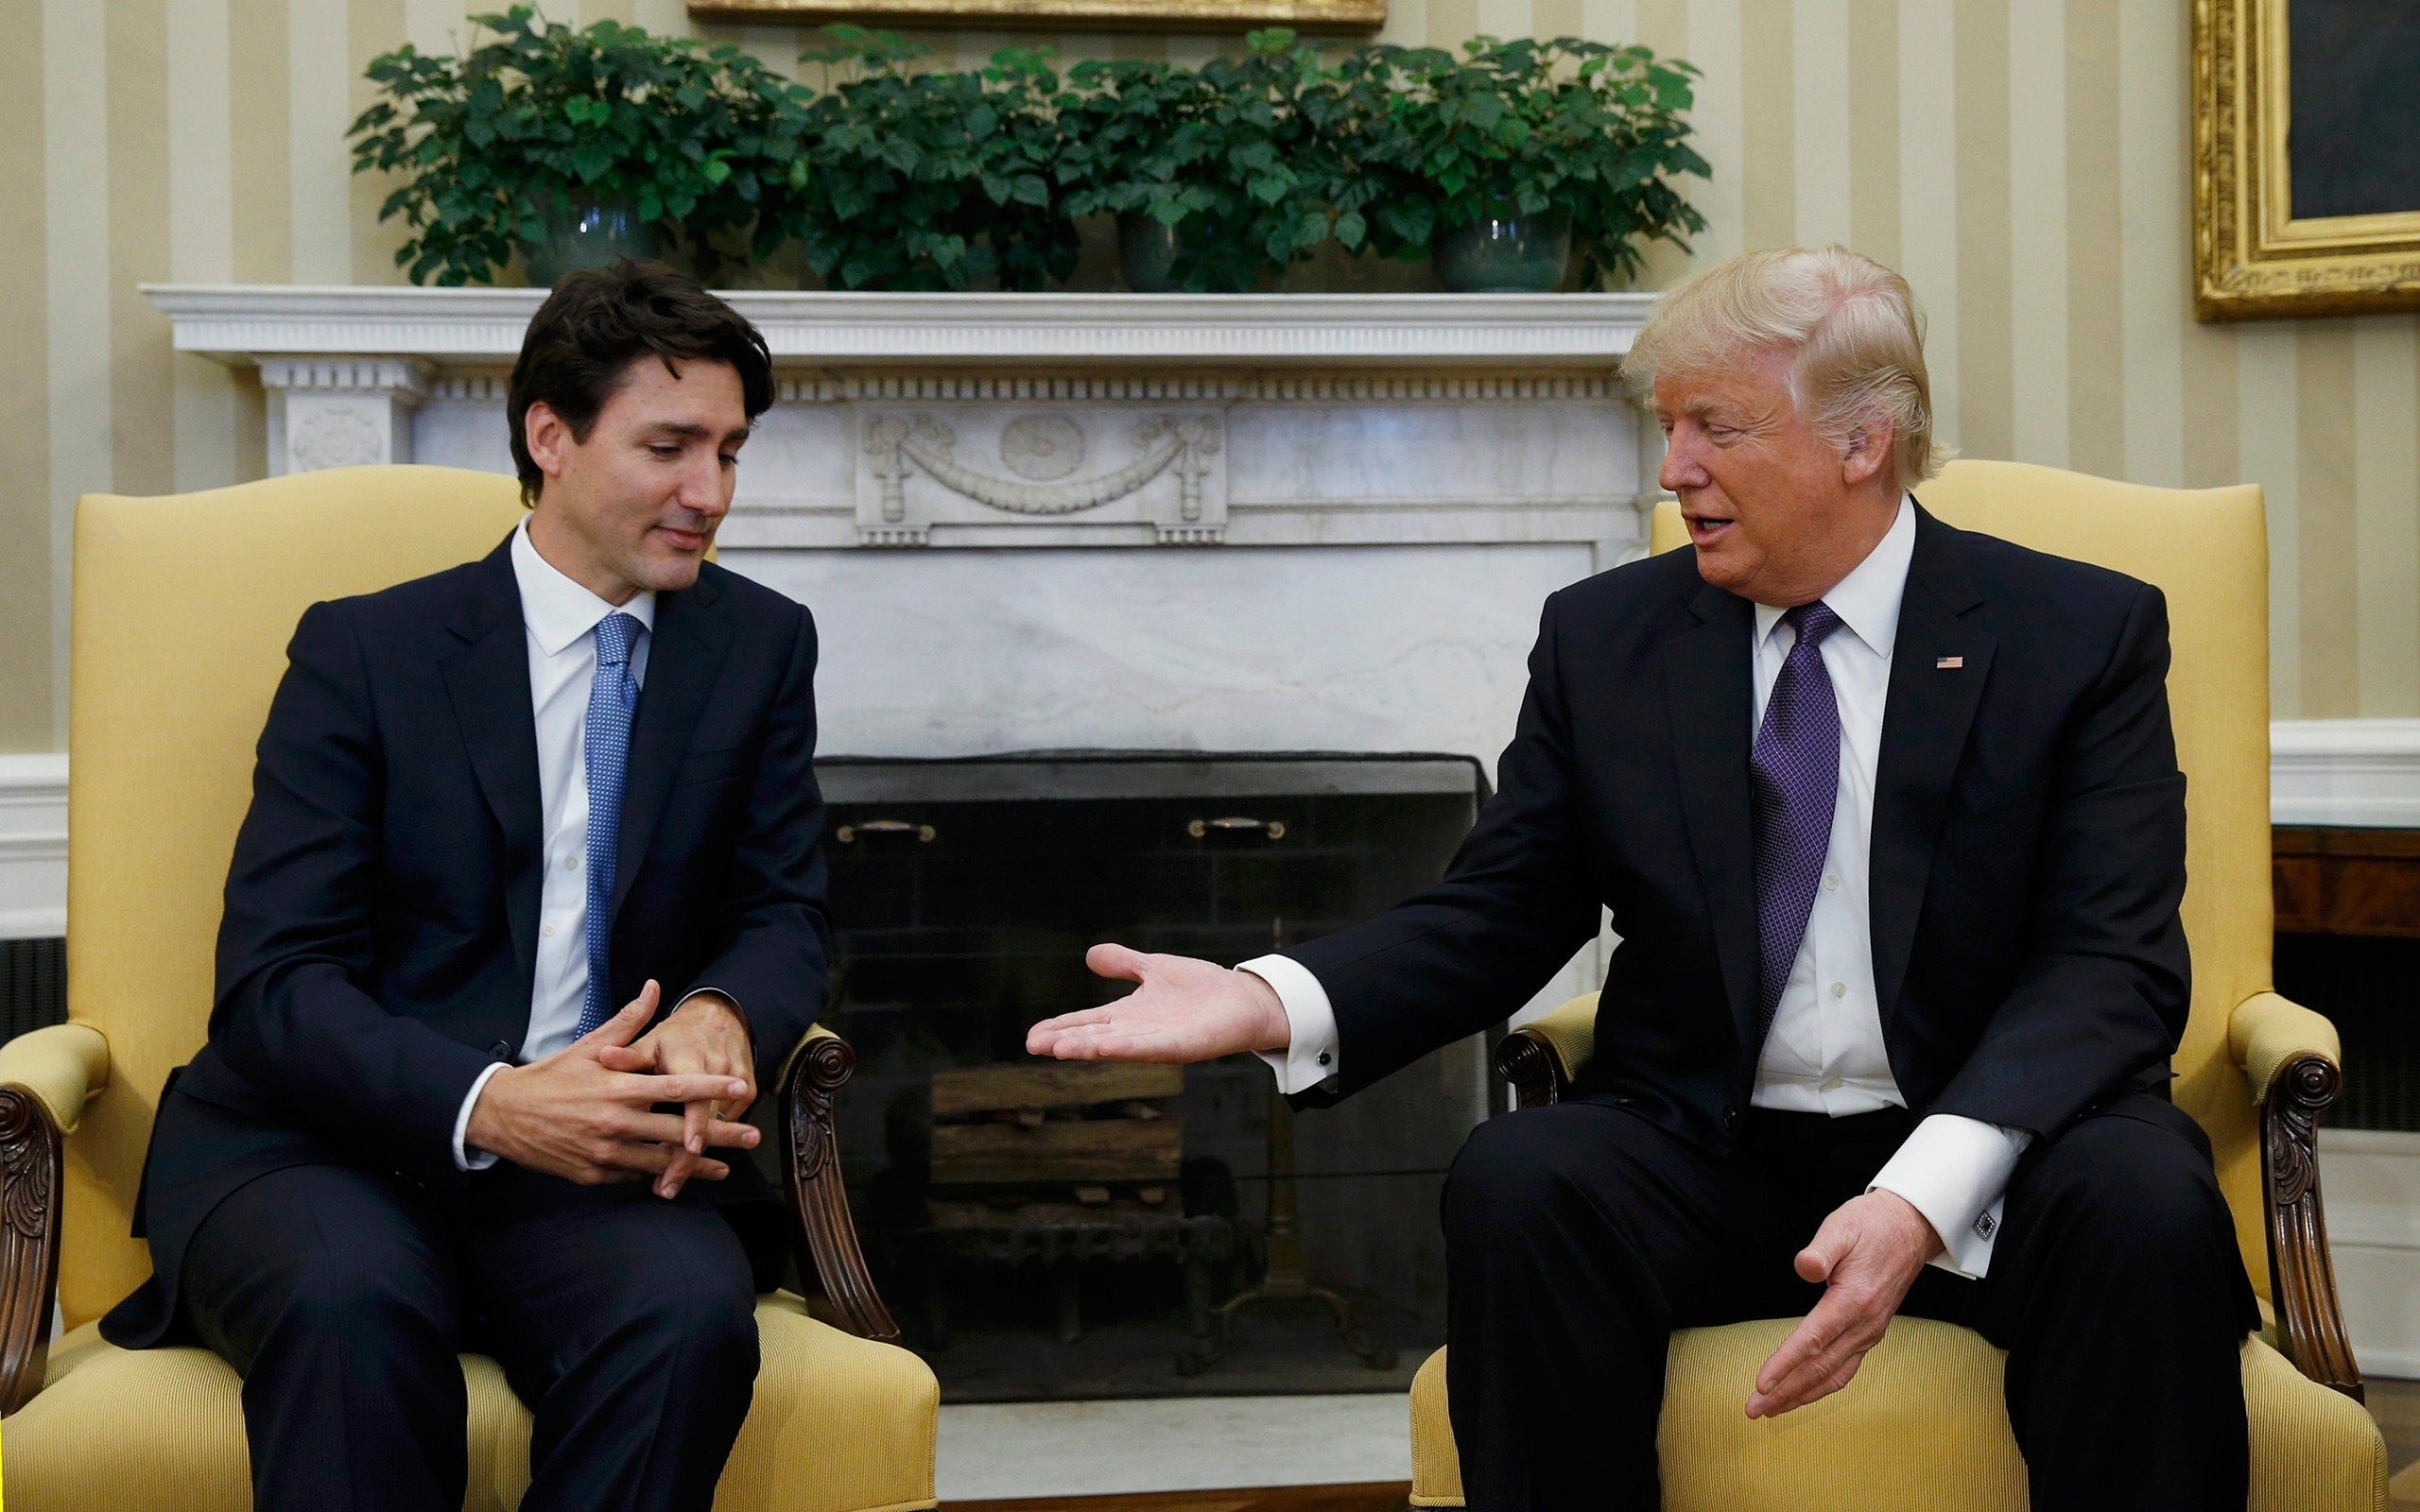 Canadian Prime Minister Justin Trudeau meets with President Trump in the Oval Office at the White House on Feb. 13, 2017. (Kevin Lamarque—Reuters)